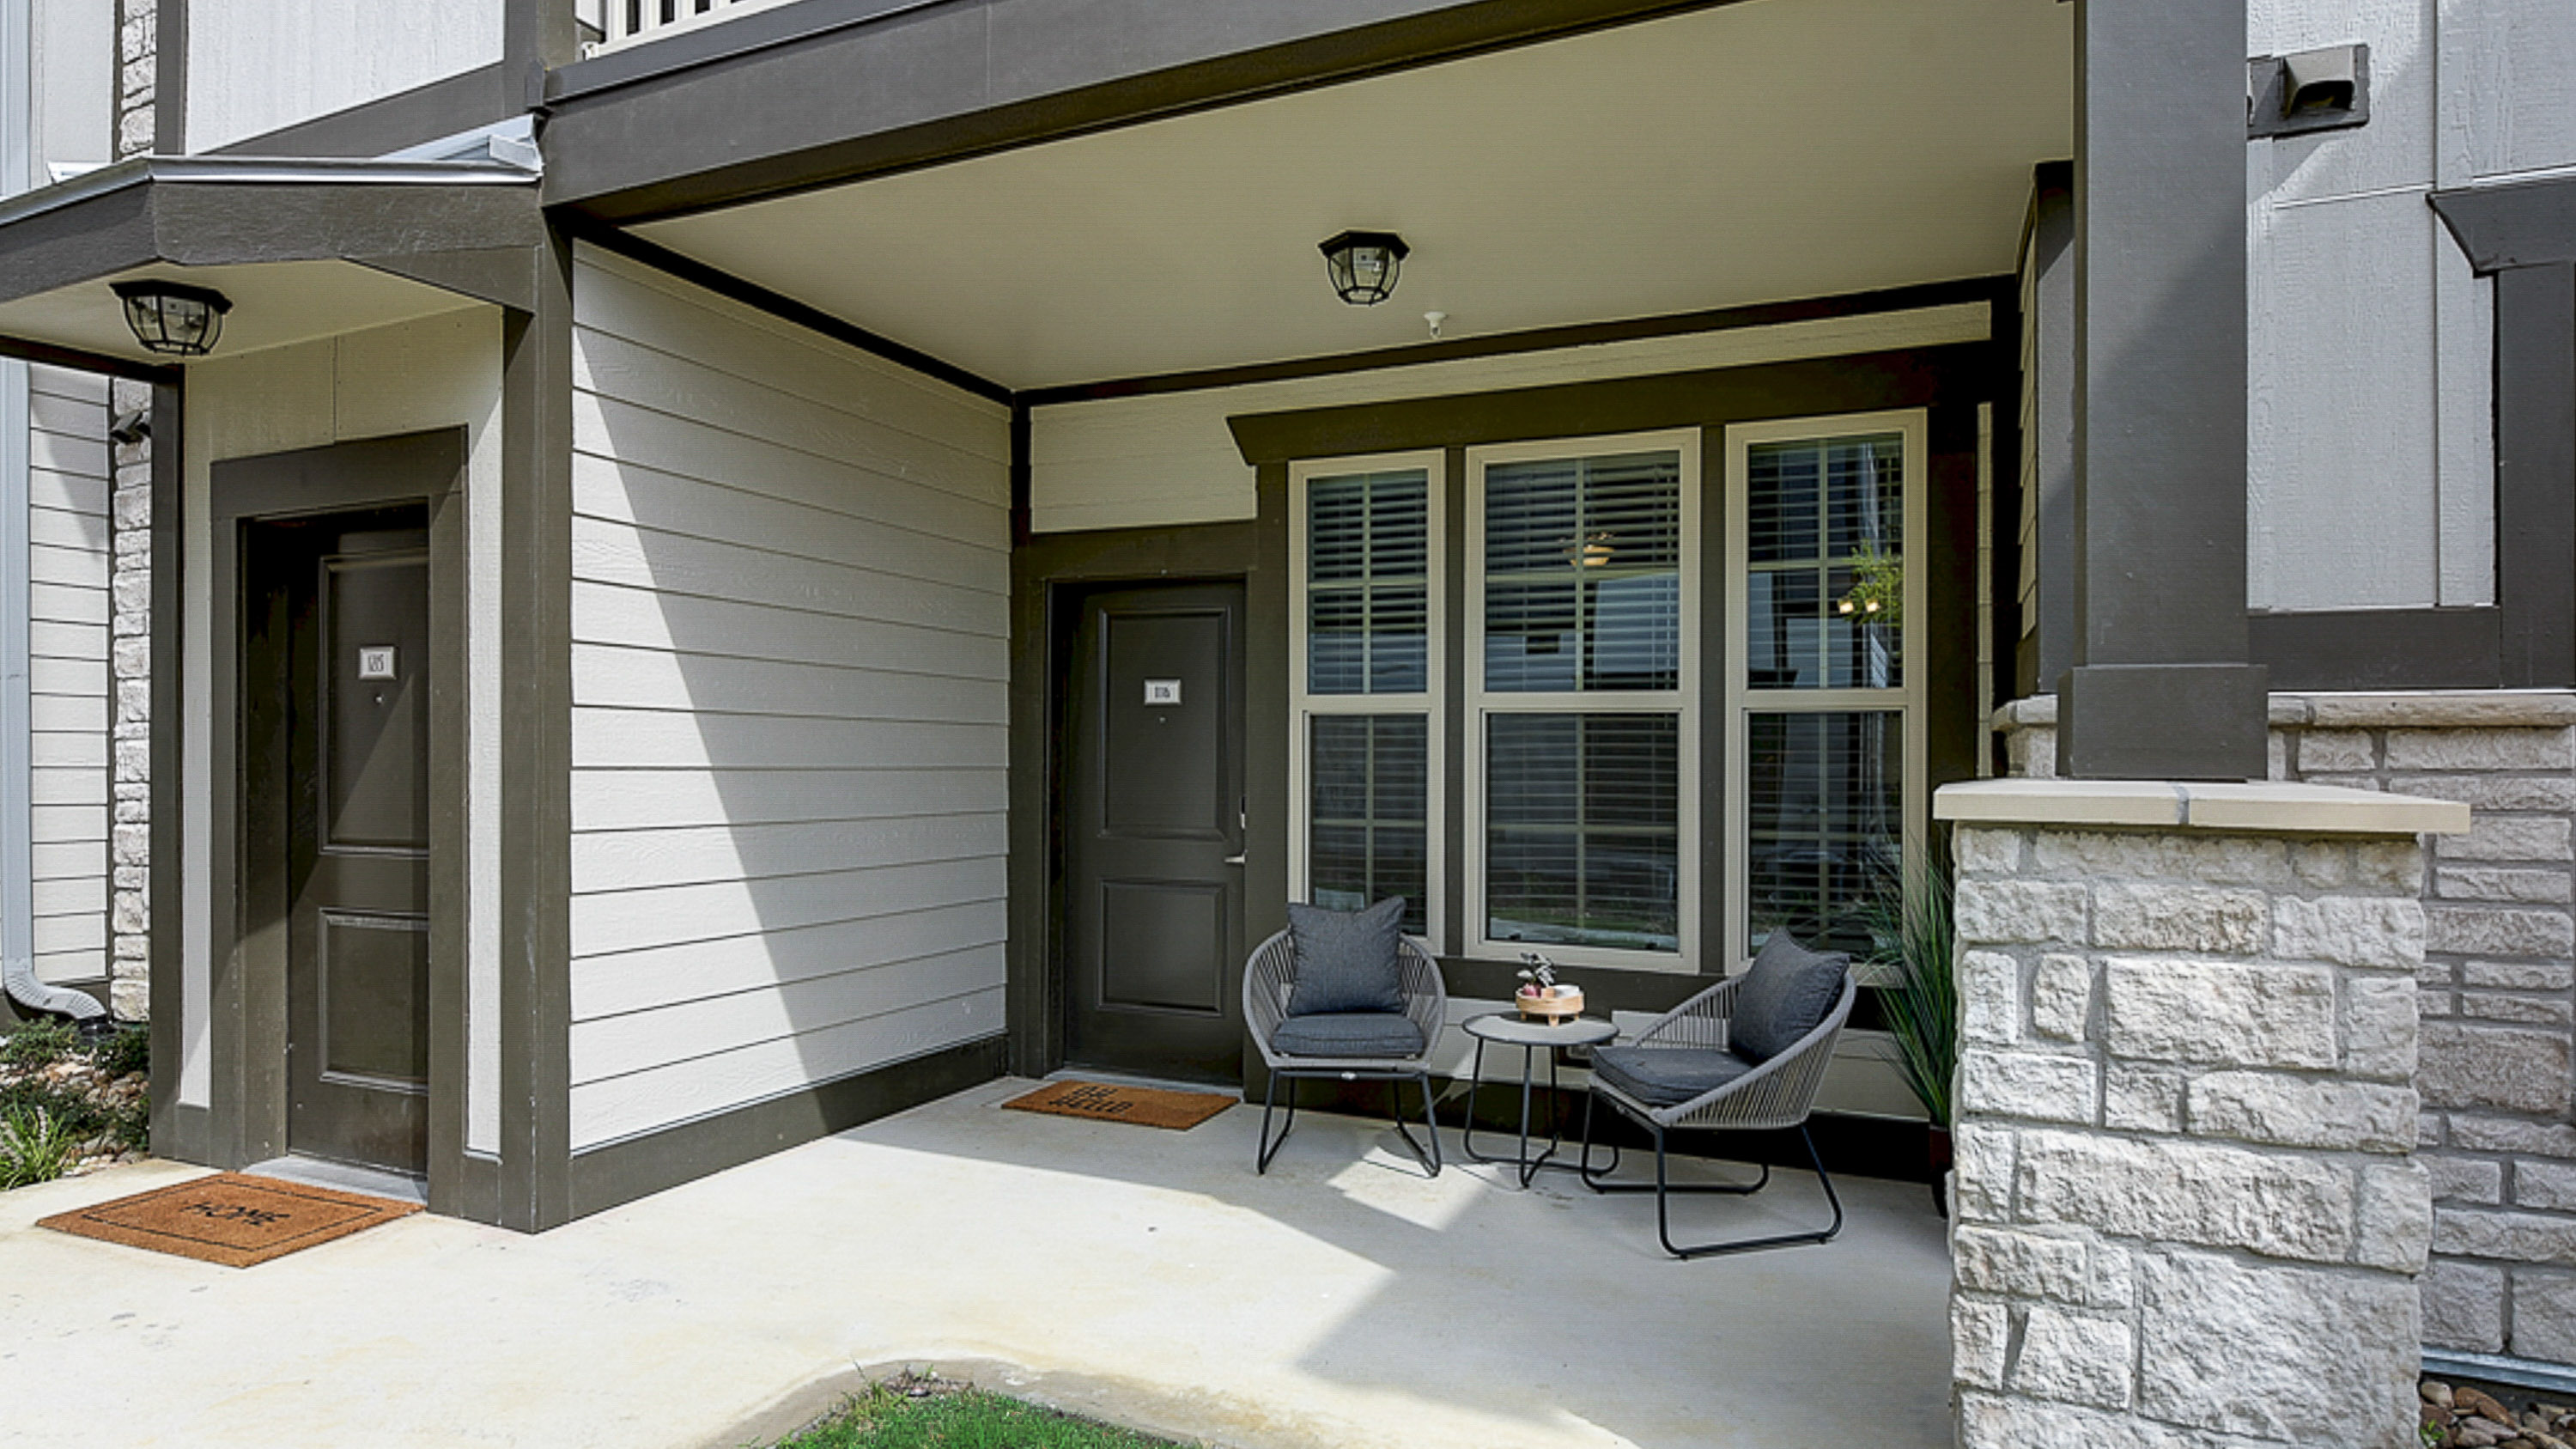 Private Entry directly into your apartment home rental at Springs at Grand Prairie apartments